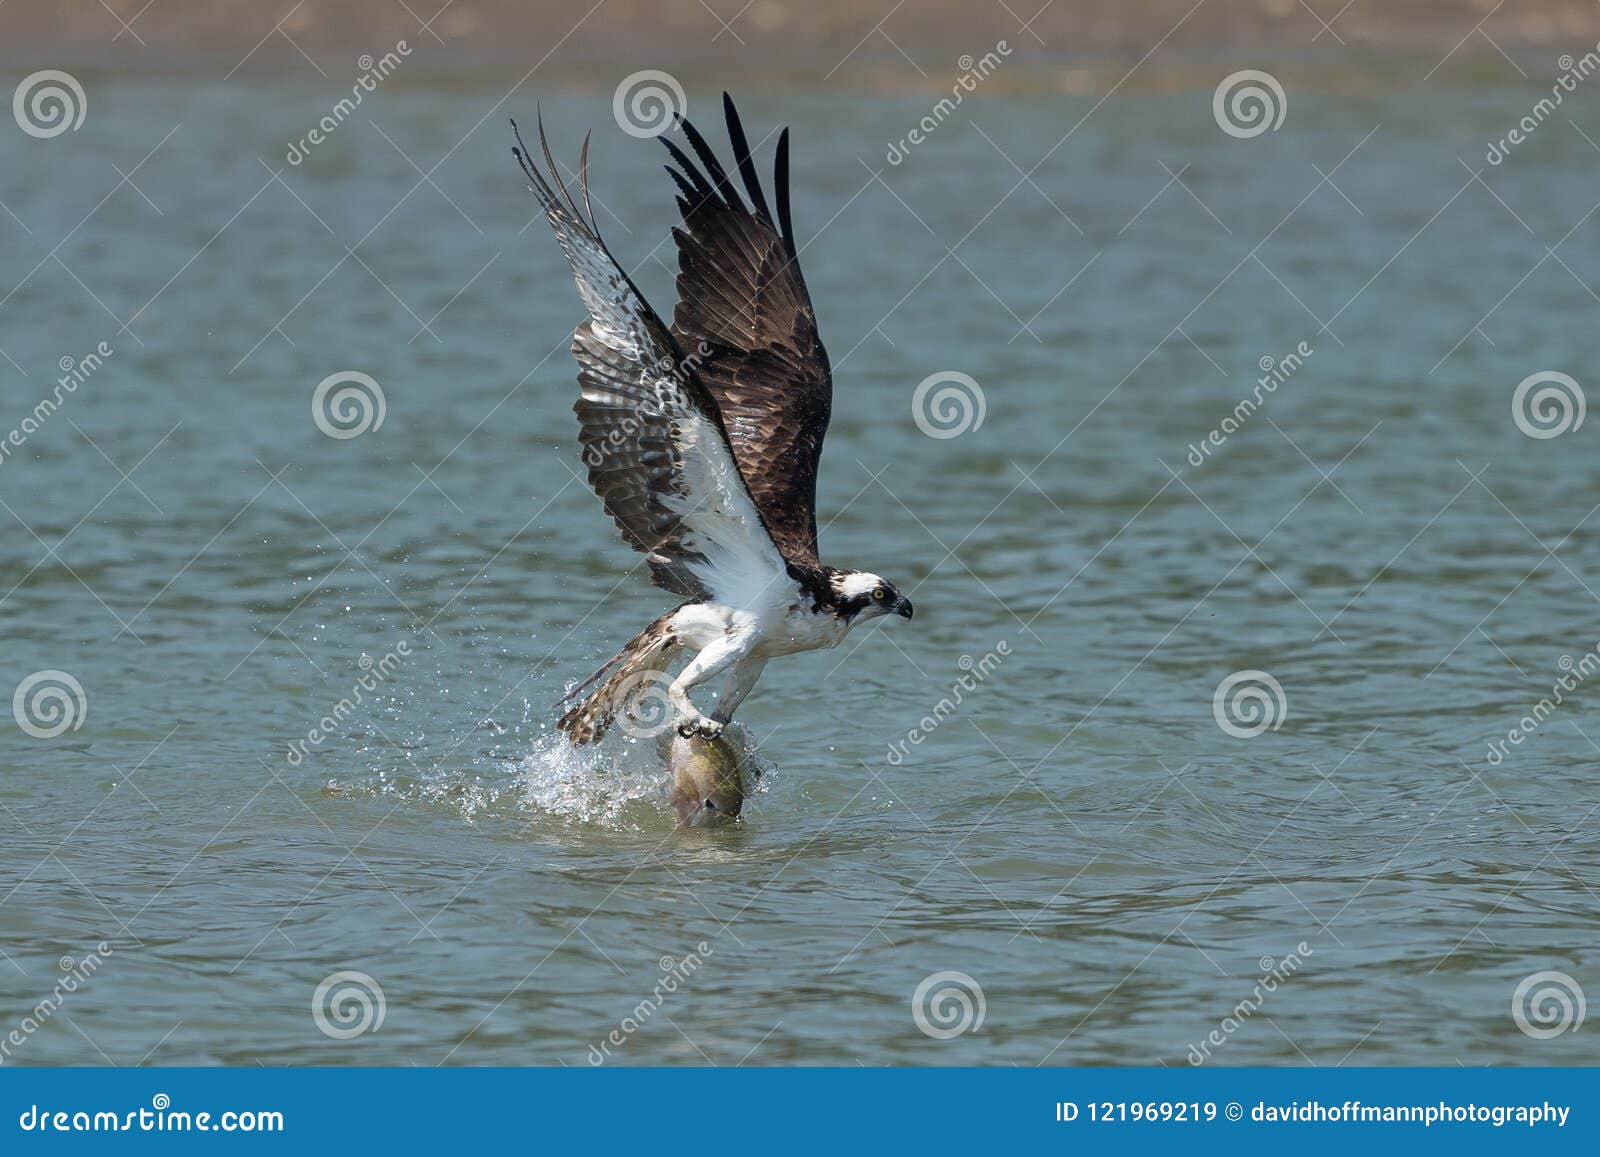 Osprey Catching Fish from the Lake. Stock Image - Image of natural, flight:  121969219